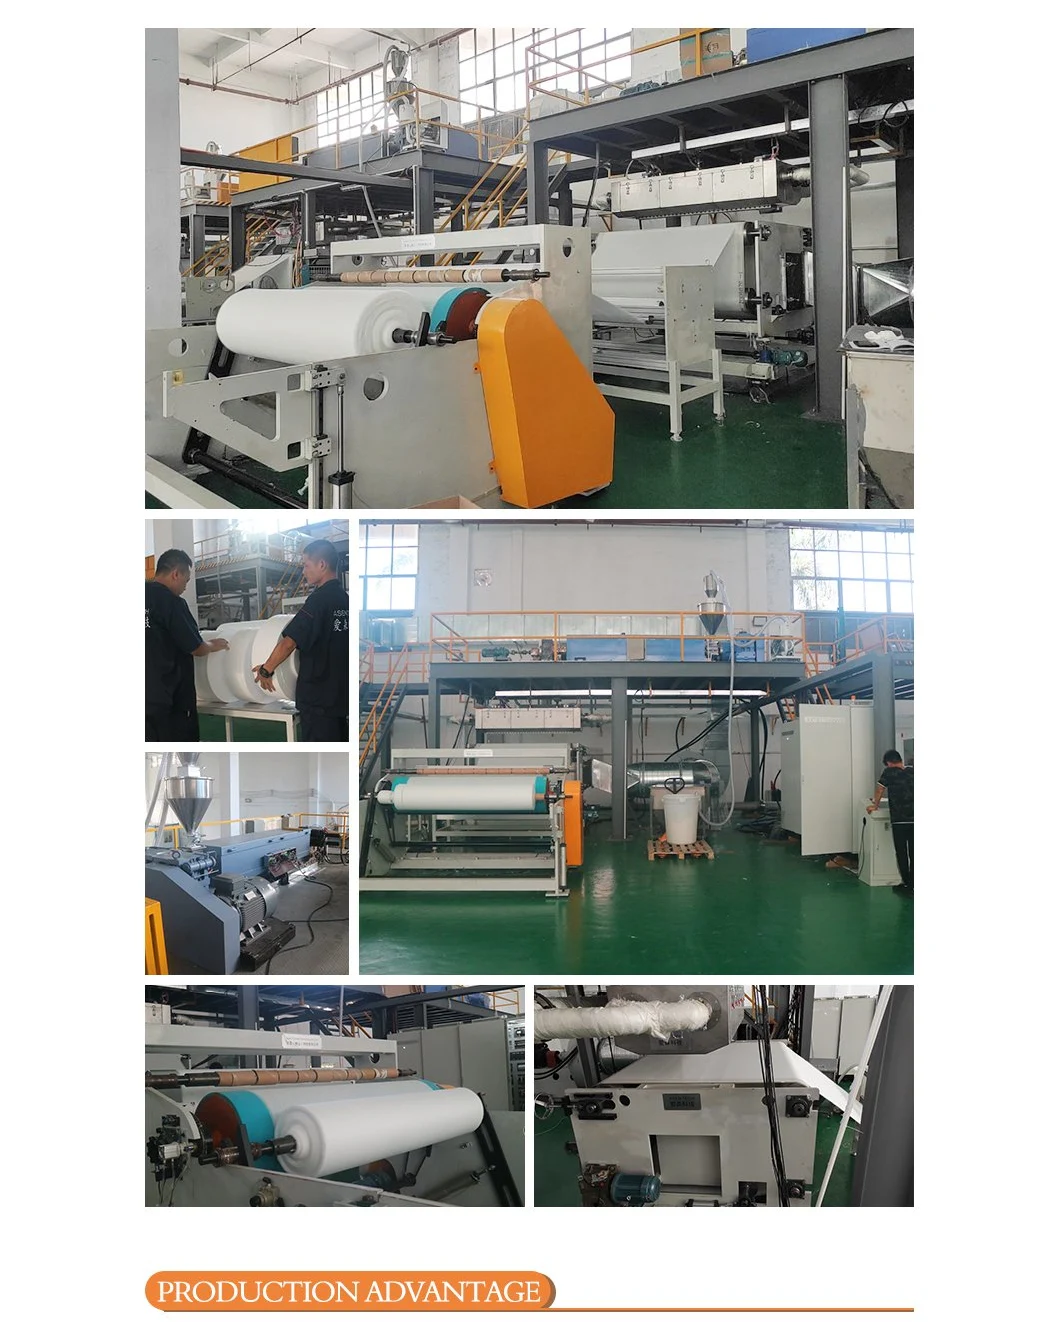 SMMS 2400mm Spunbond Meltblown Nonwoven Making Machine and Non Woven Fabric Machine with Textile Machine